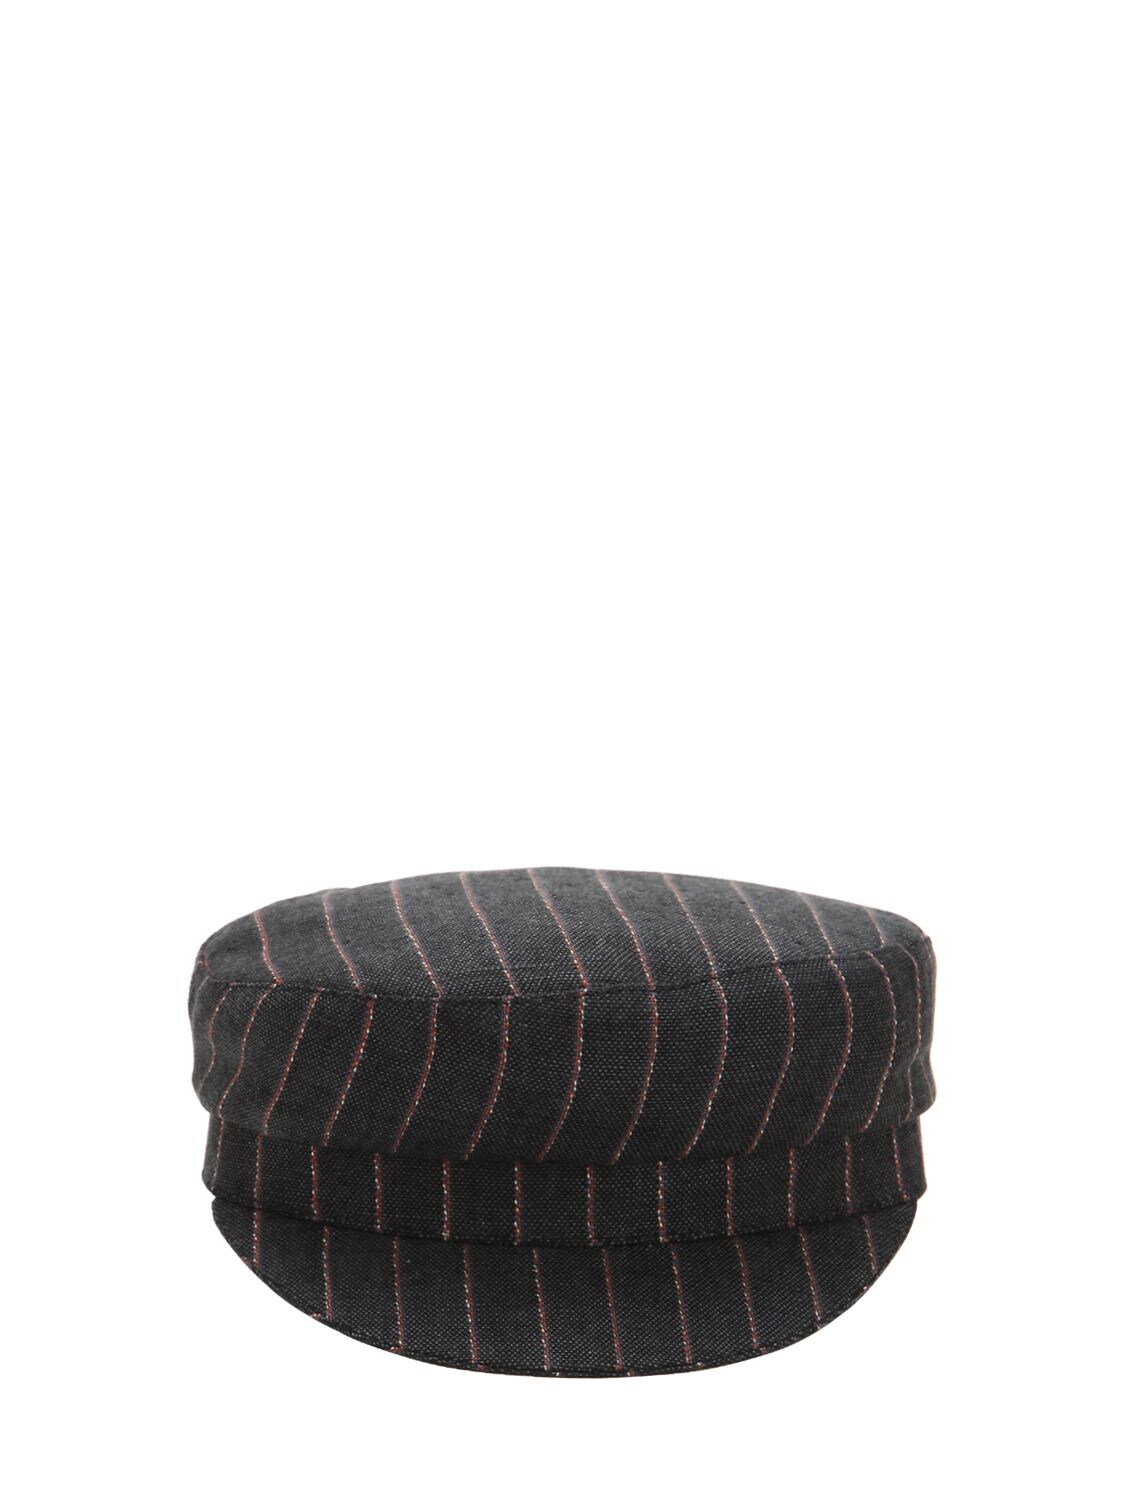 ISABEL MARANT STRIPED LINEN CAPTAIN'S HAT,69IW0B005-MDFCSW2